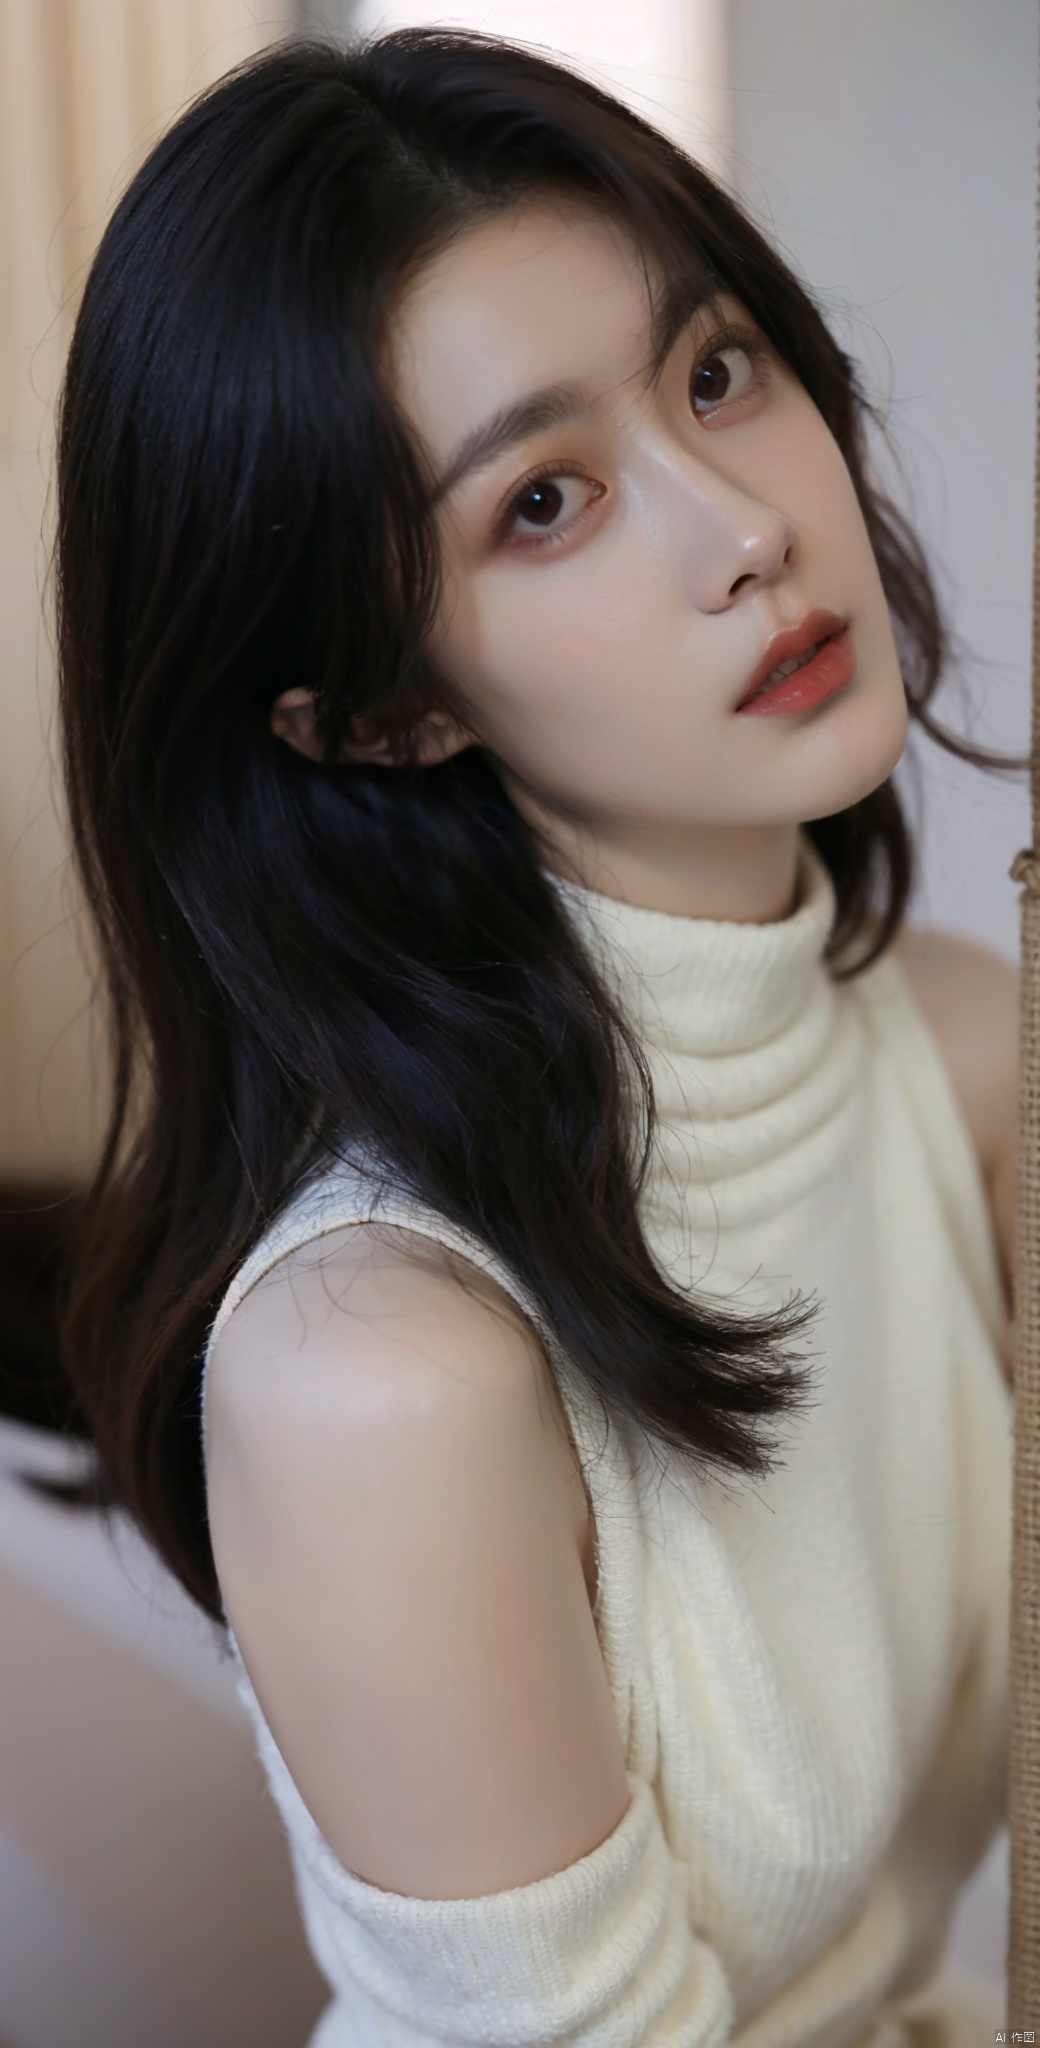  masterpiece, high quality, 8k uhd, realistic, perfect face, beautiful face, sweater, turtleneck, sleeveless, bare shoulder, gorgeous, gorgeous female, beautiful, perfect round breasts, charming, perfect female body, fancy lighting, perfect skin, soft skin